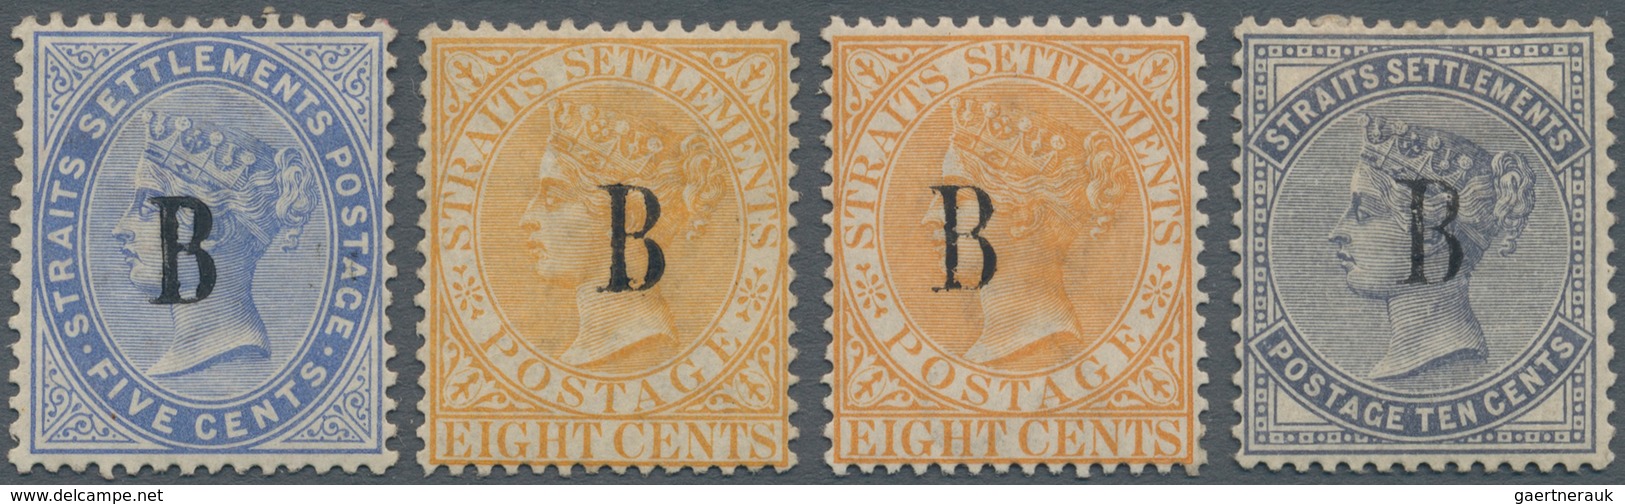 Malaiische Staaten - Straits Settlements - Post In Bangkok: 1882-84 Mint Group Of Four Stamps Optd. - Straits Settlements